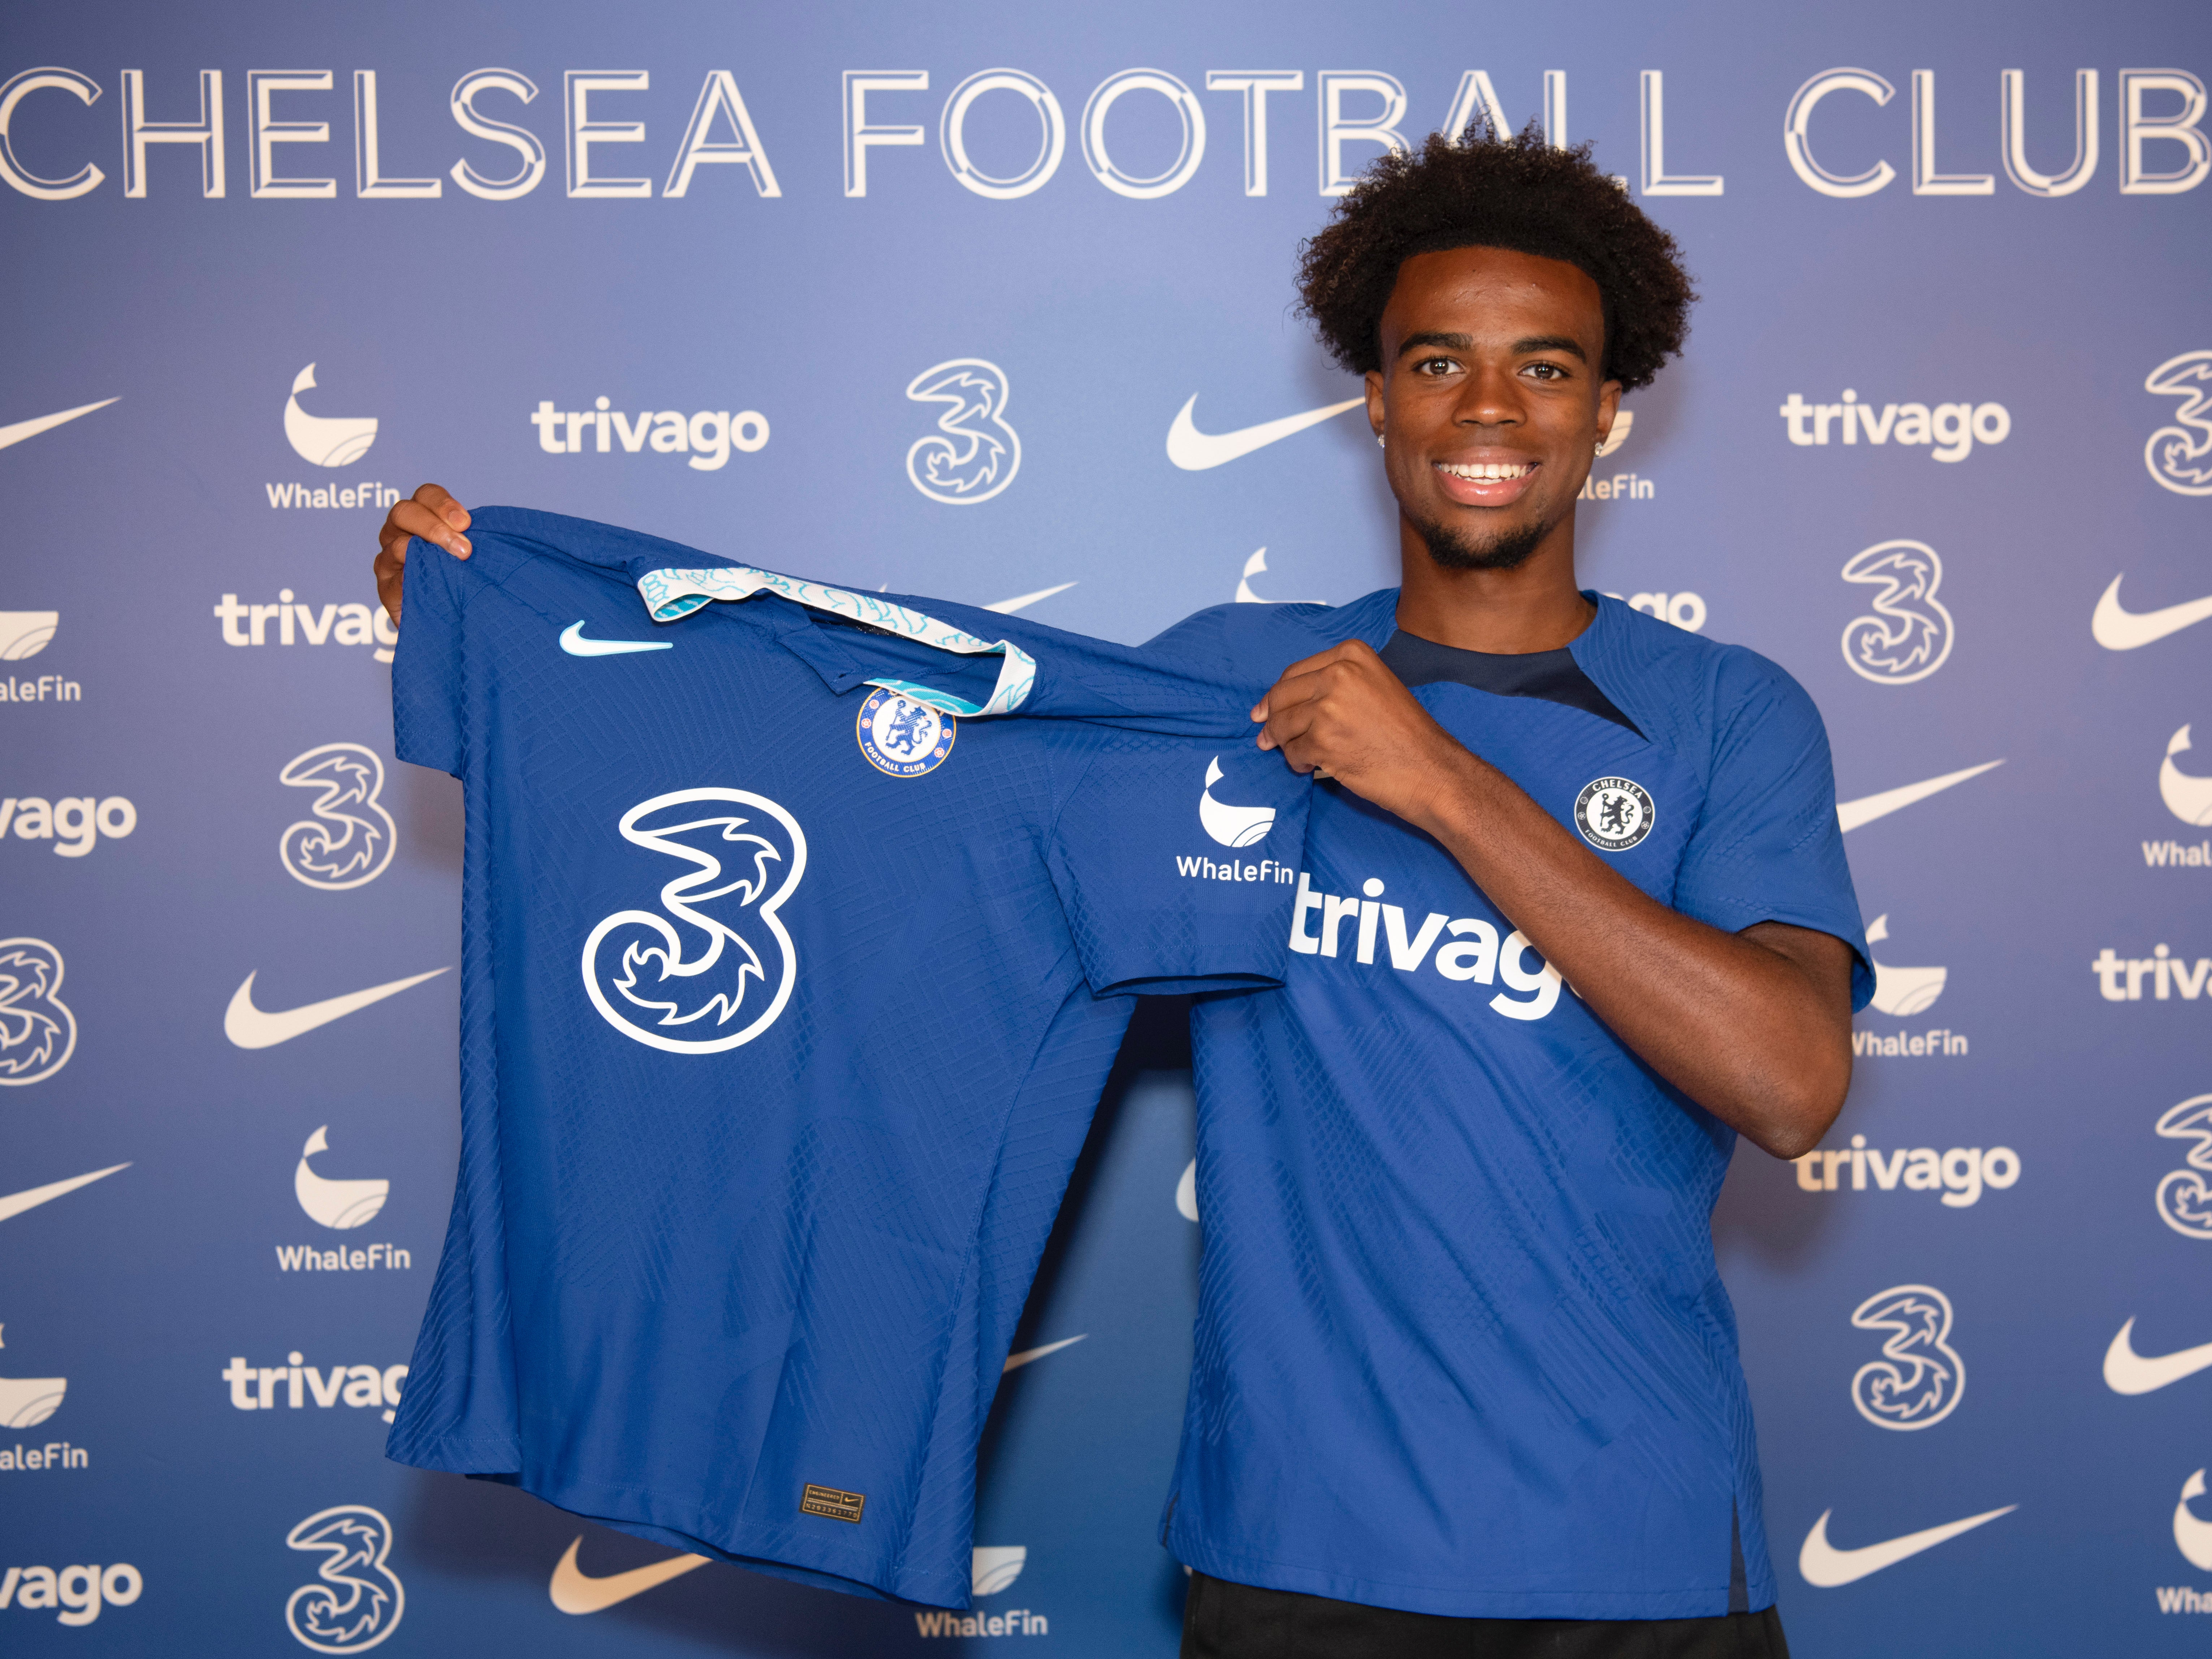 Chelsea have made several moves to target promising young players